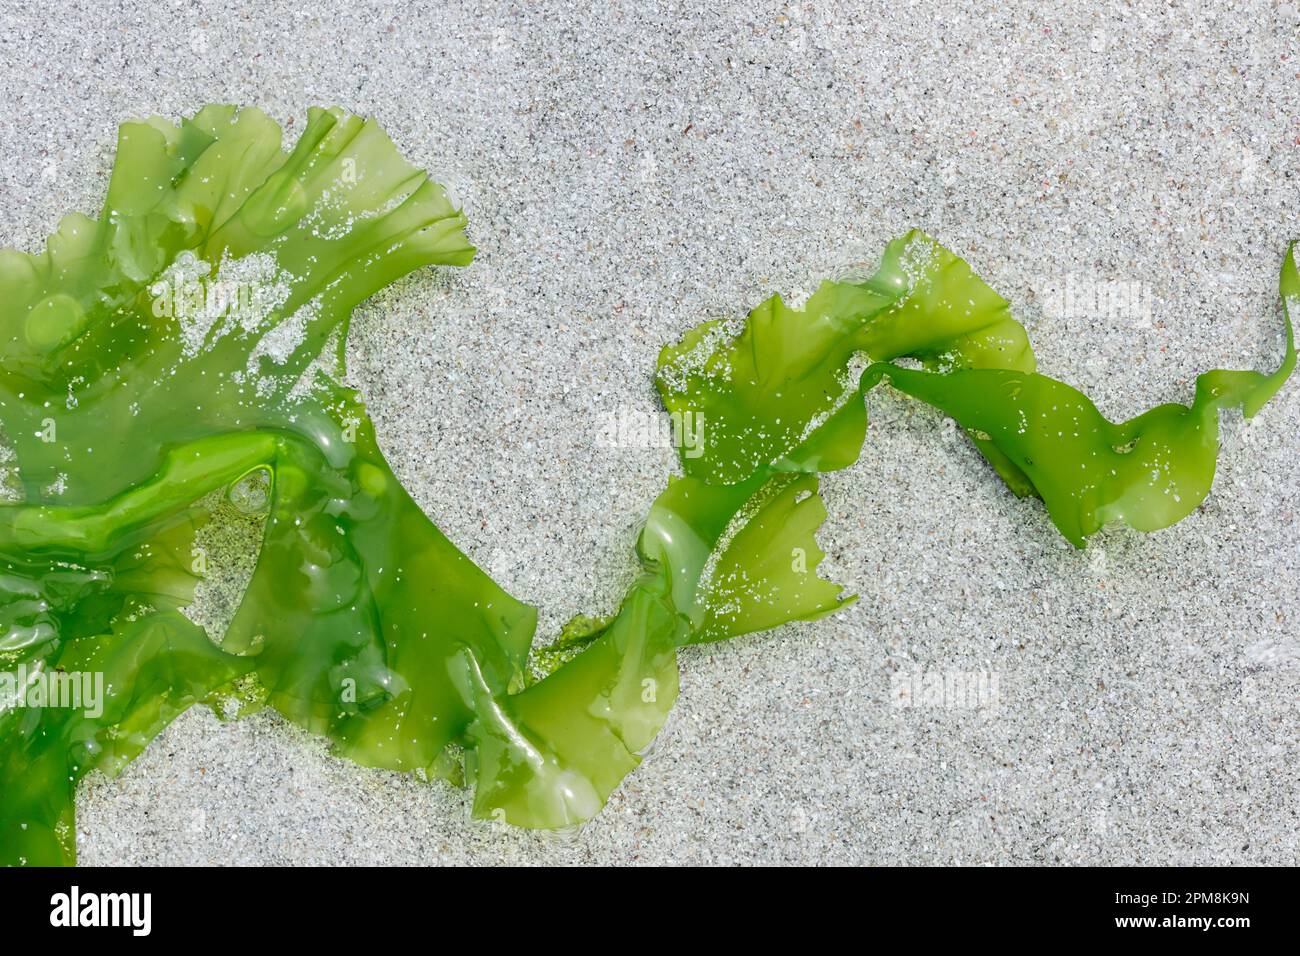 Sea Lettuce (Ulva lactuca) frond cast-up on beach on the Isle of Sanday, Orkney, Northern Isles, Scotland, August 2019 Stock Photo